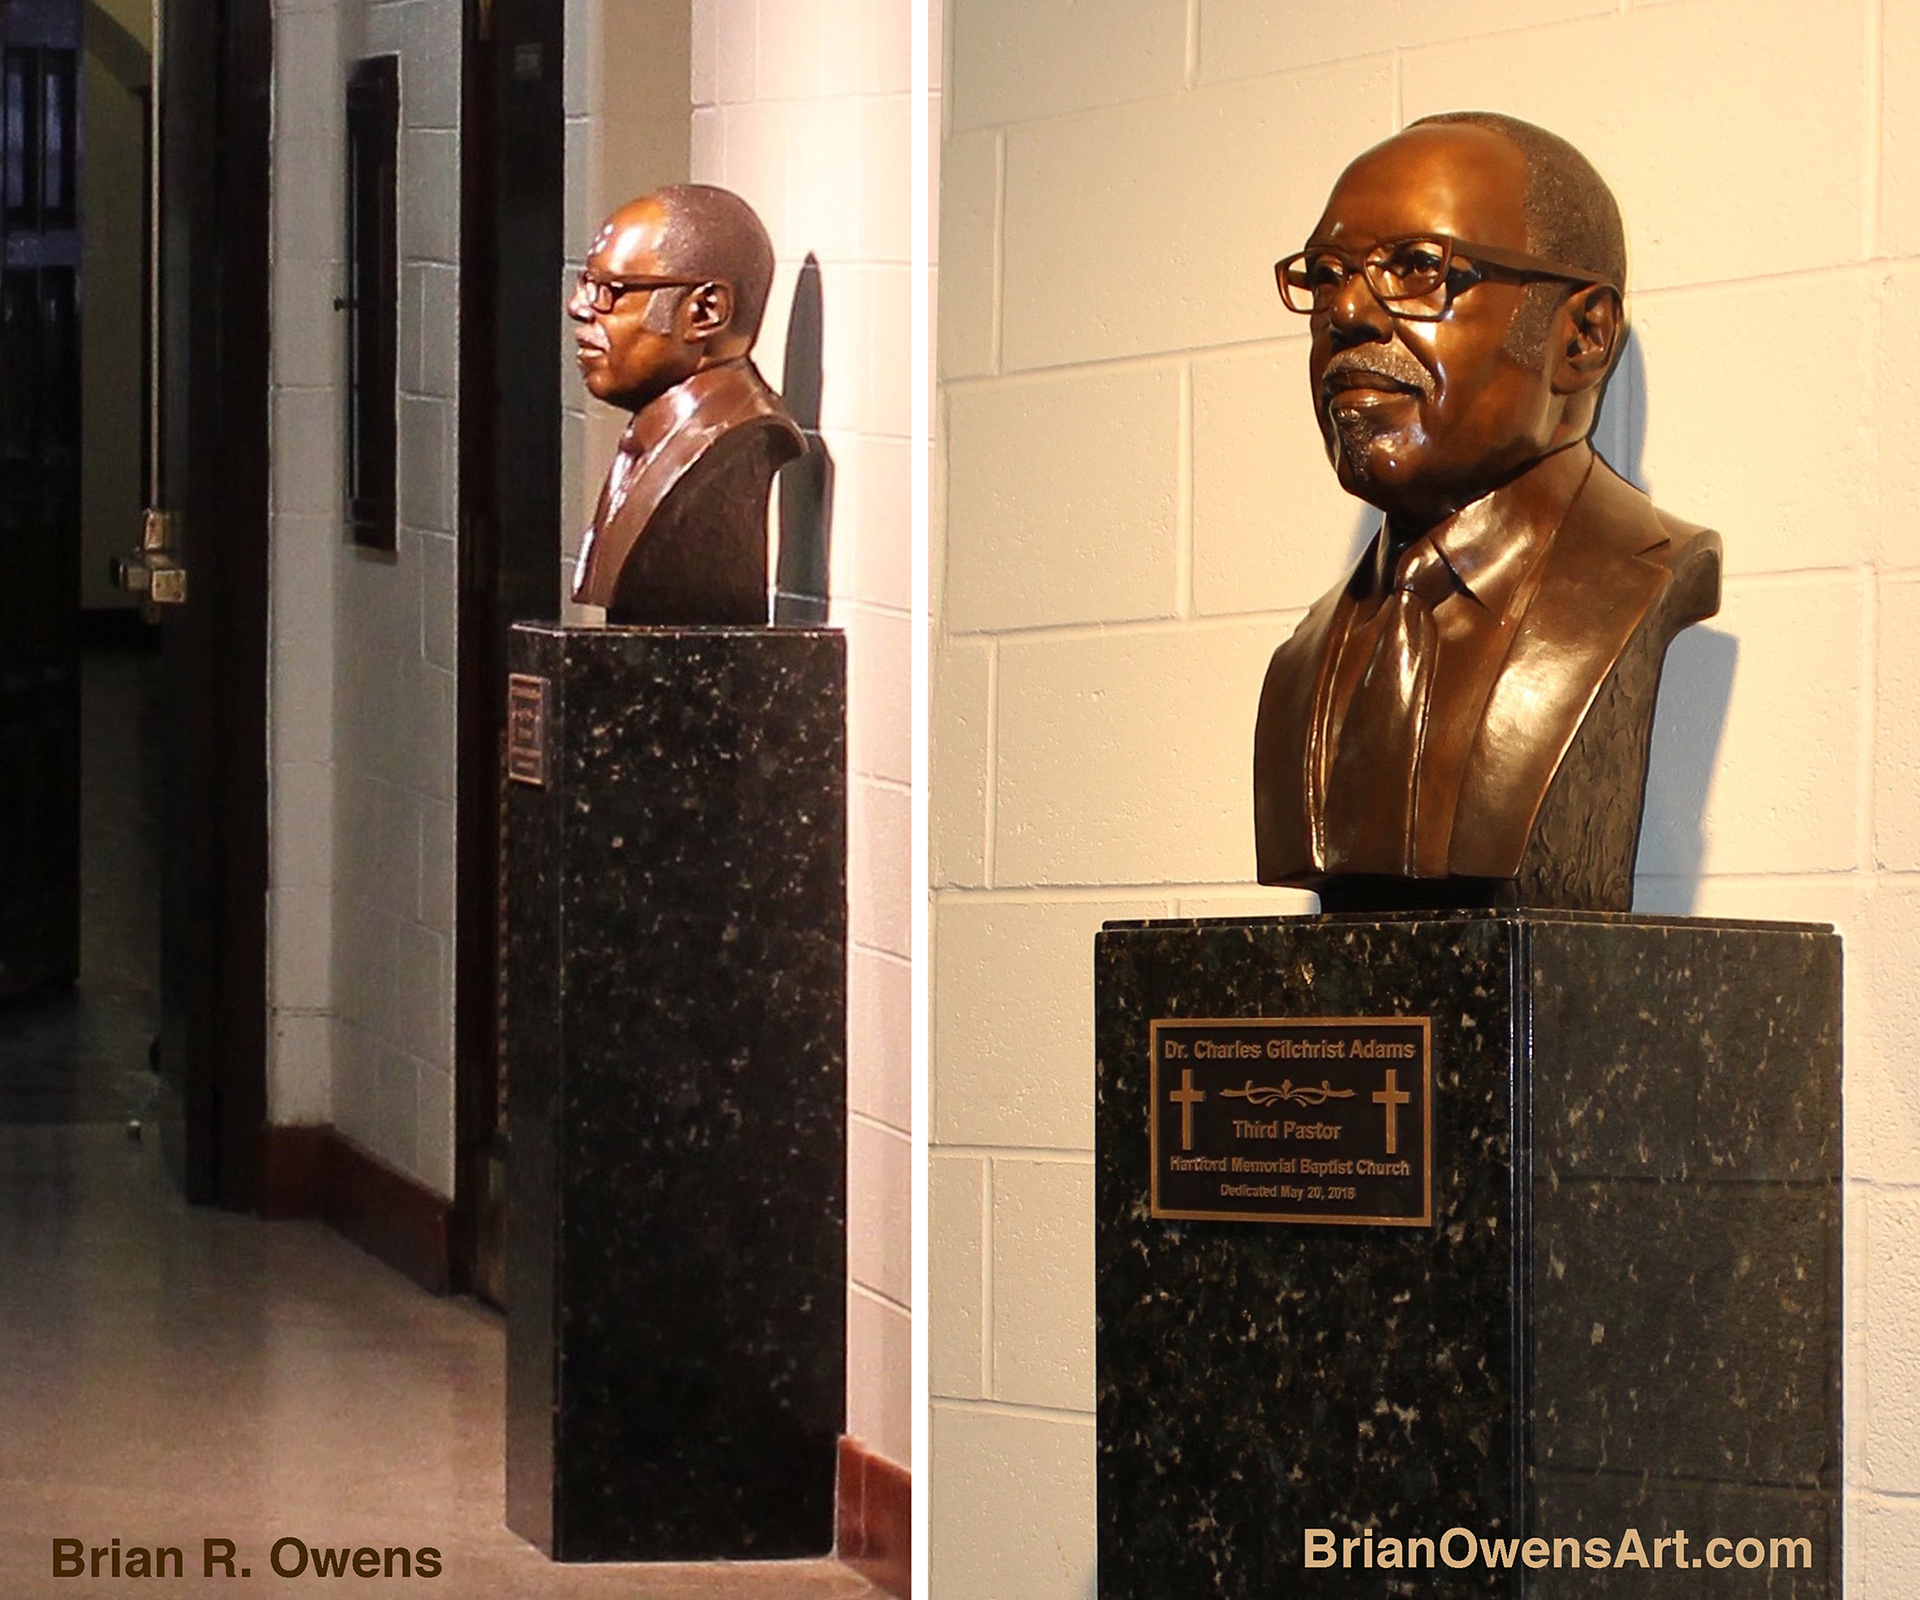 Bust of Dr. Charles G. Adams, installed